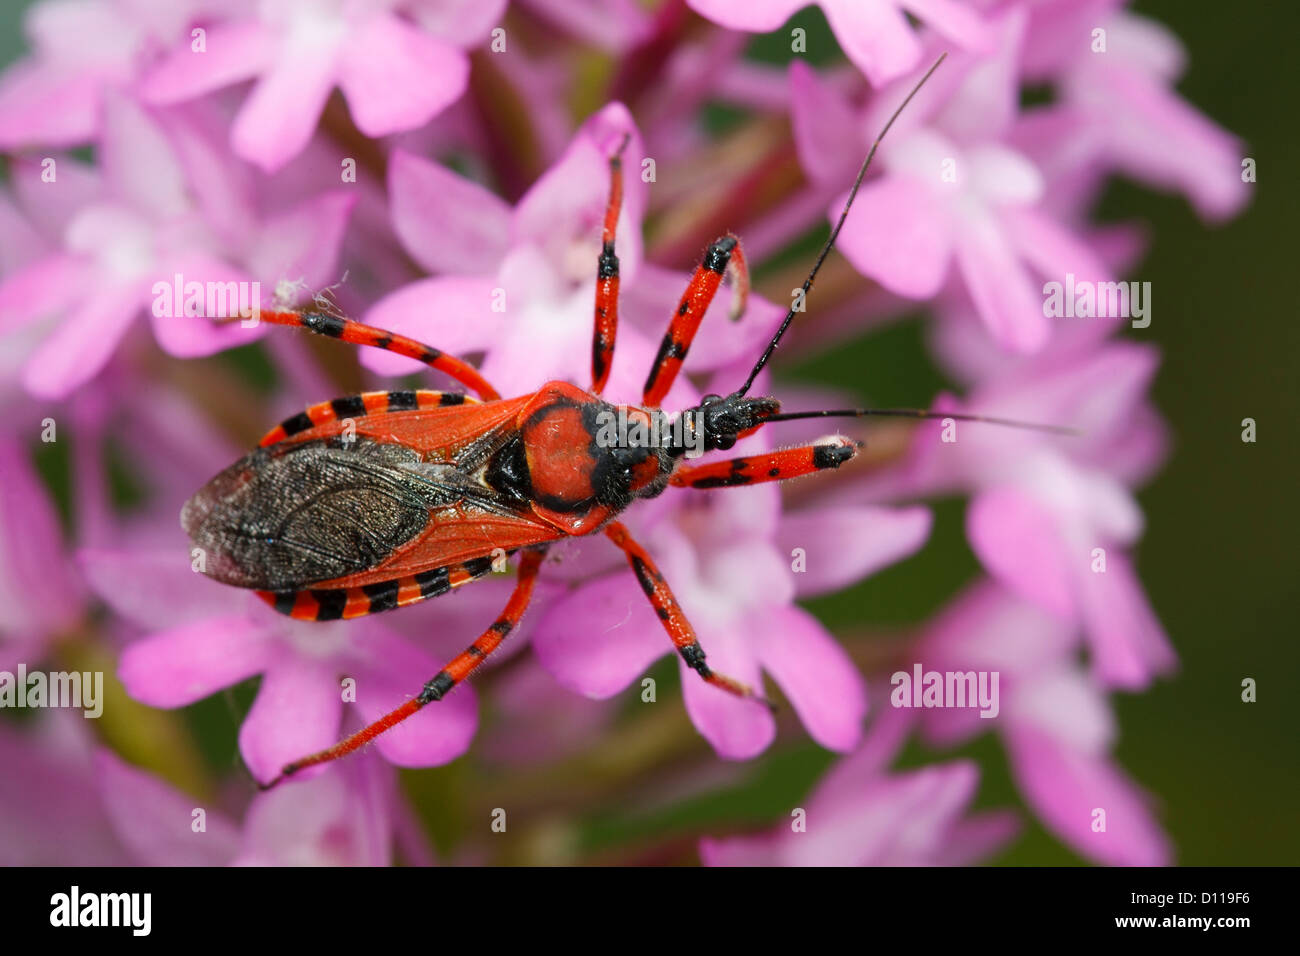 Red Assassin Bug (Rhynocoris iracundus) adult on the flowers of a Pyramidal Orchid (Anacamptis pyramidalis). France. Stock Photo